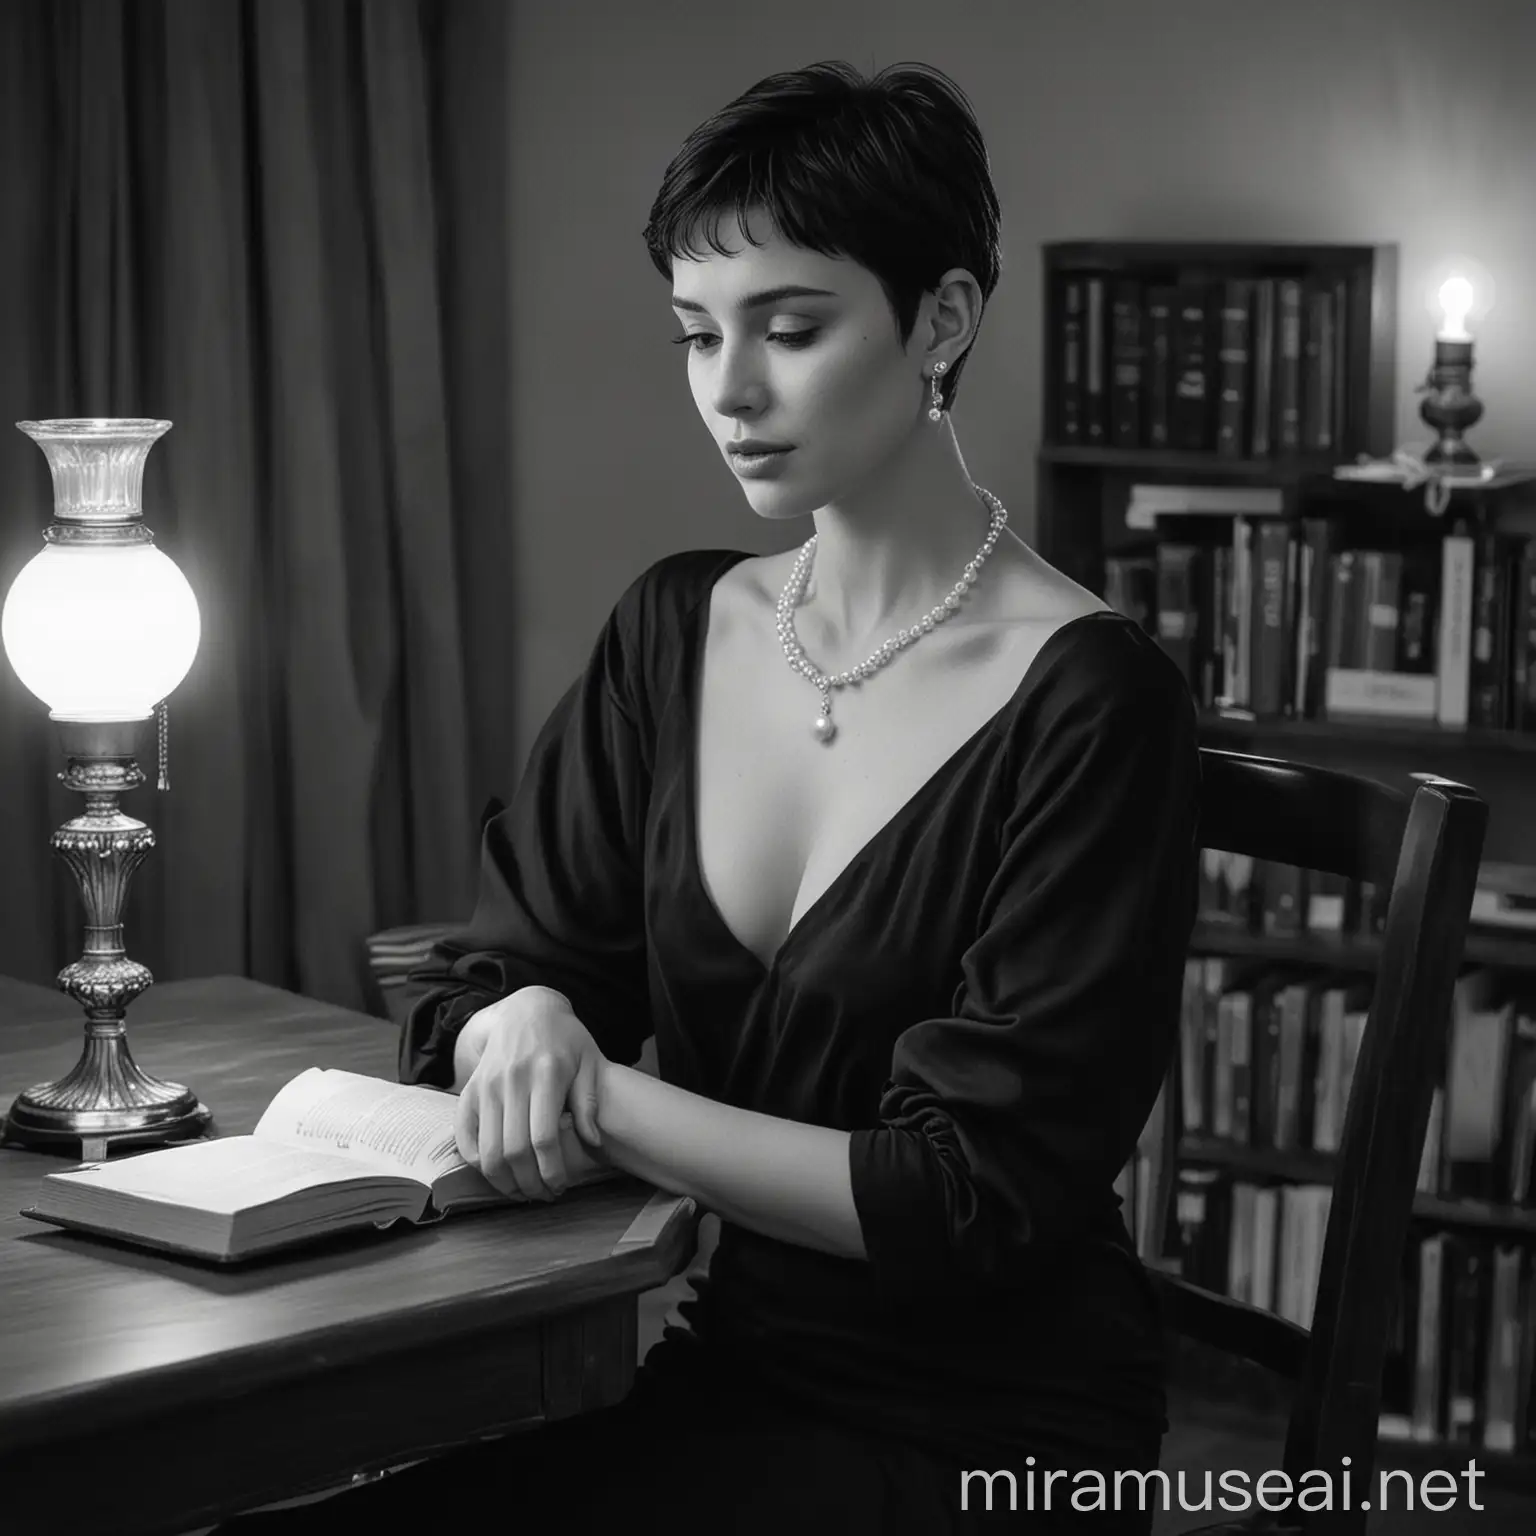 Elegant Woman with Pearl Jewelry Sitting by Desk with Books and Lamp